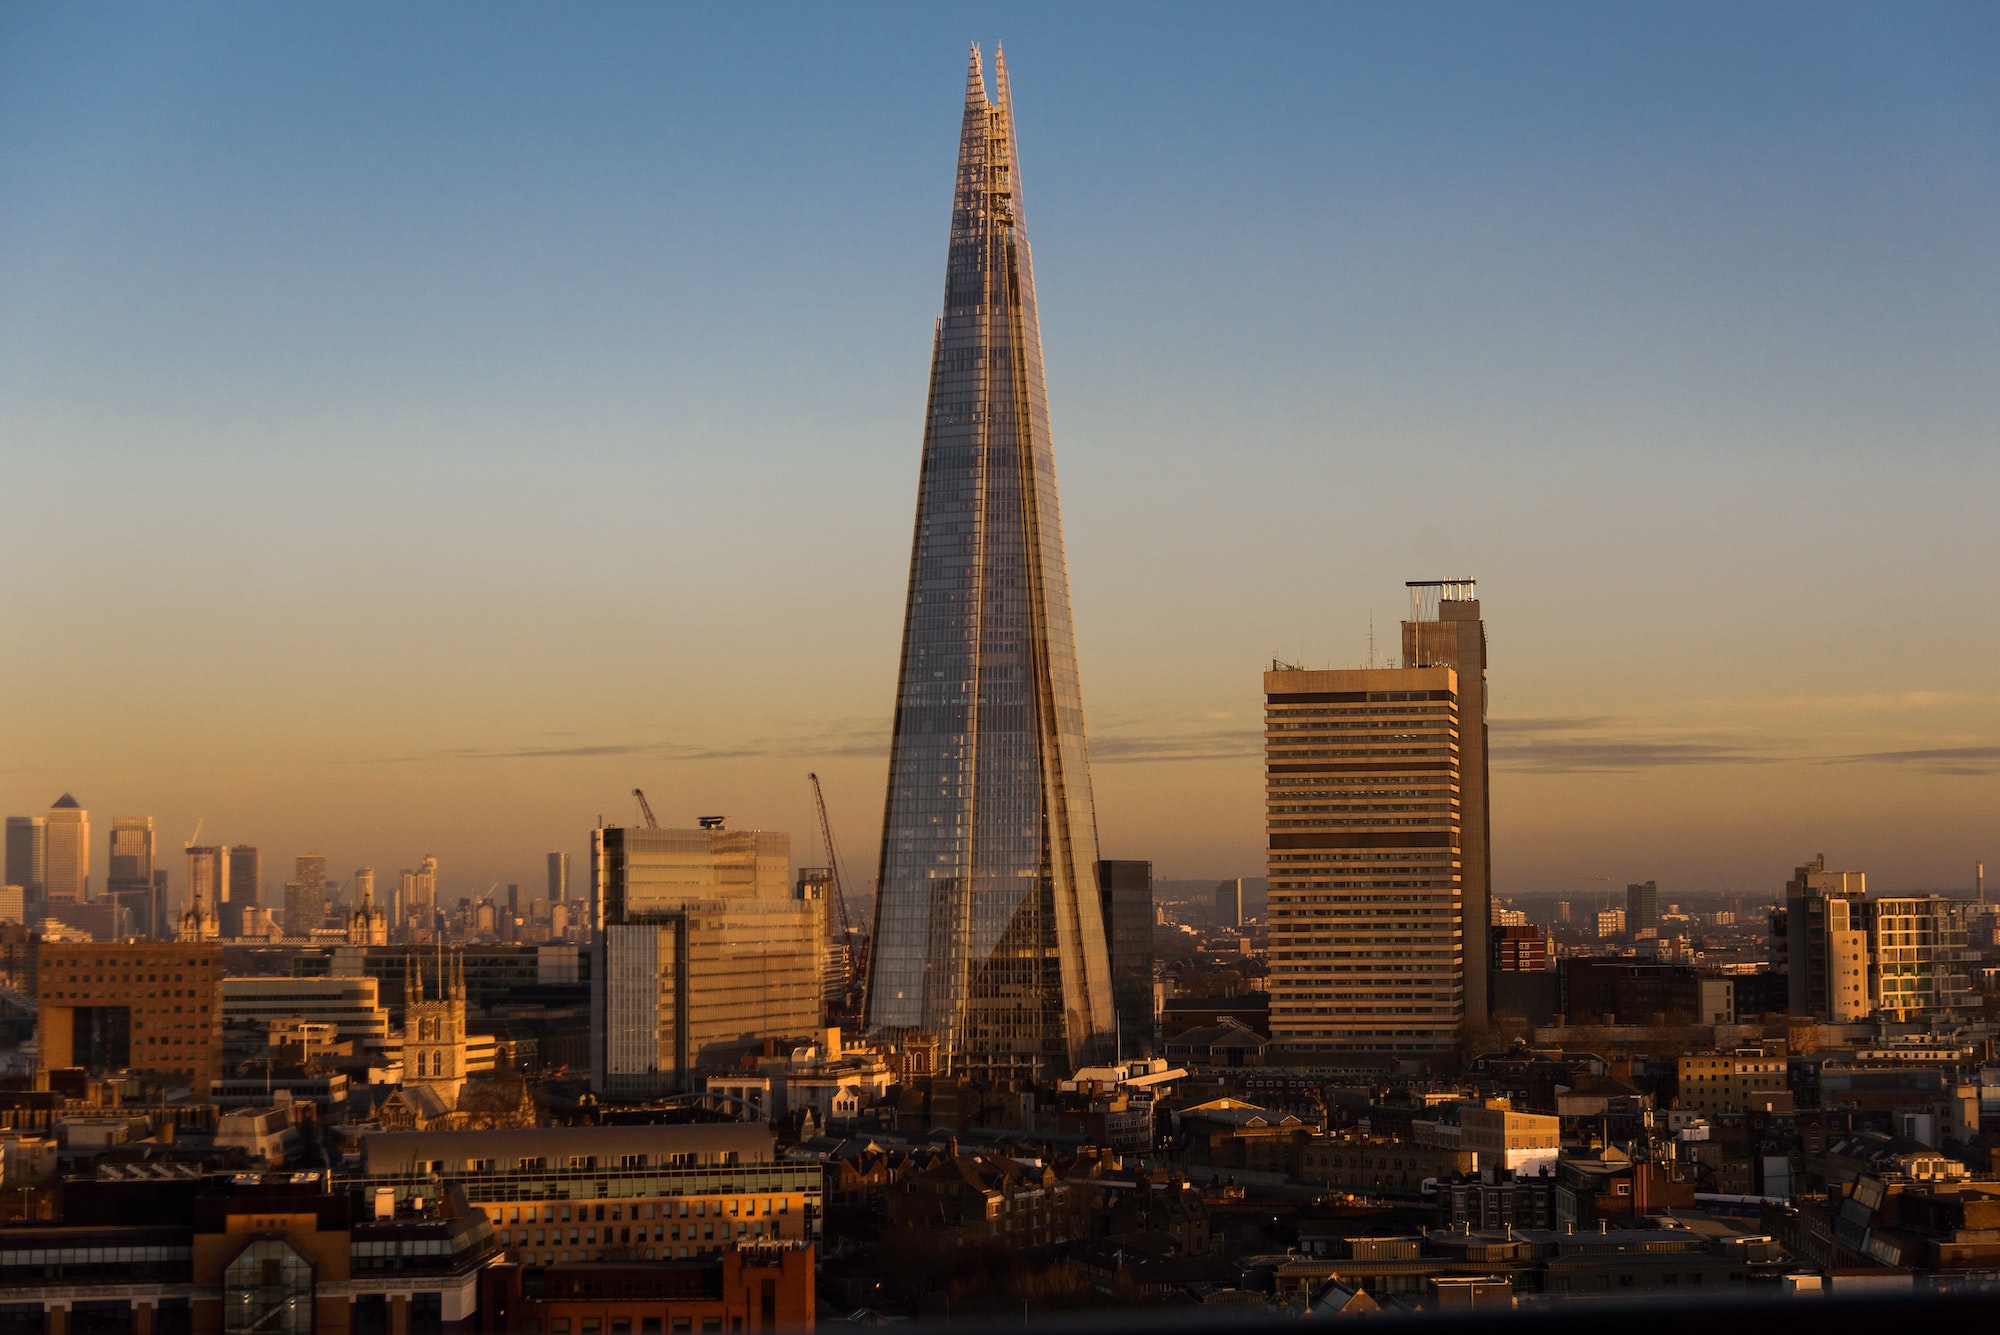 London Real Estate Investment: Areas to Watch in 2023